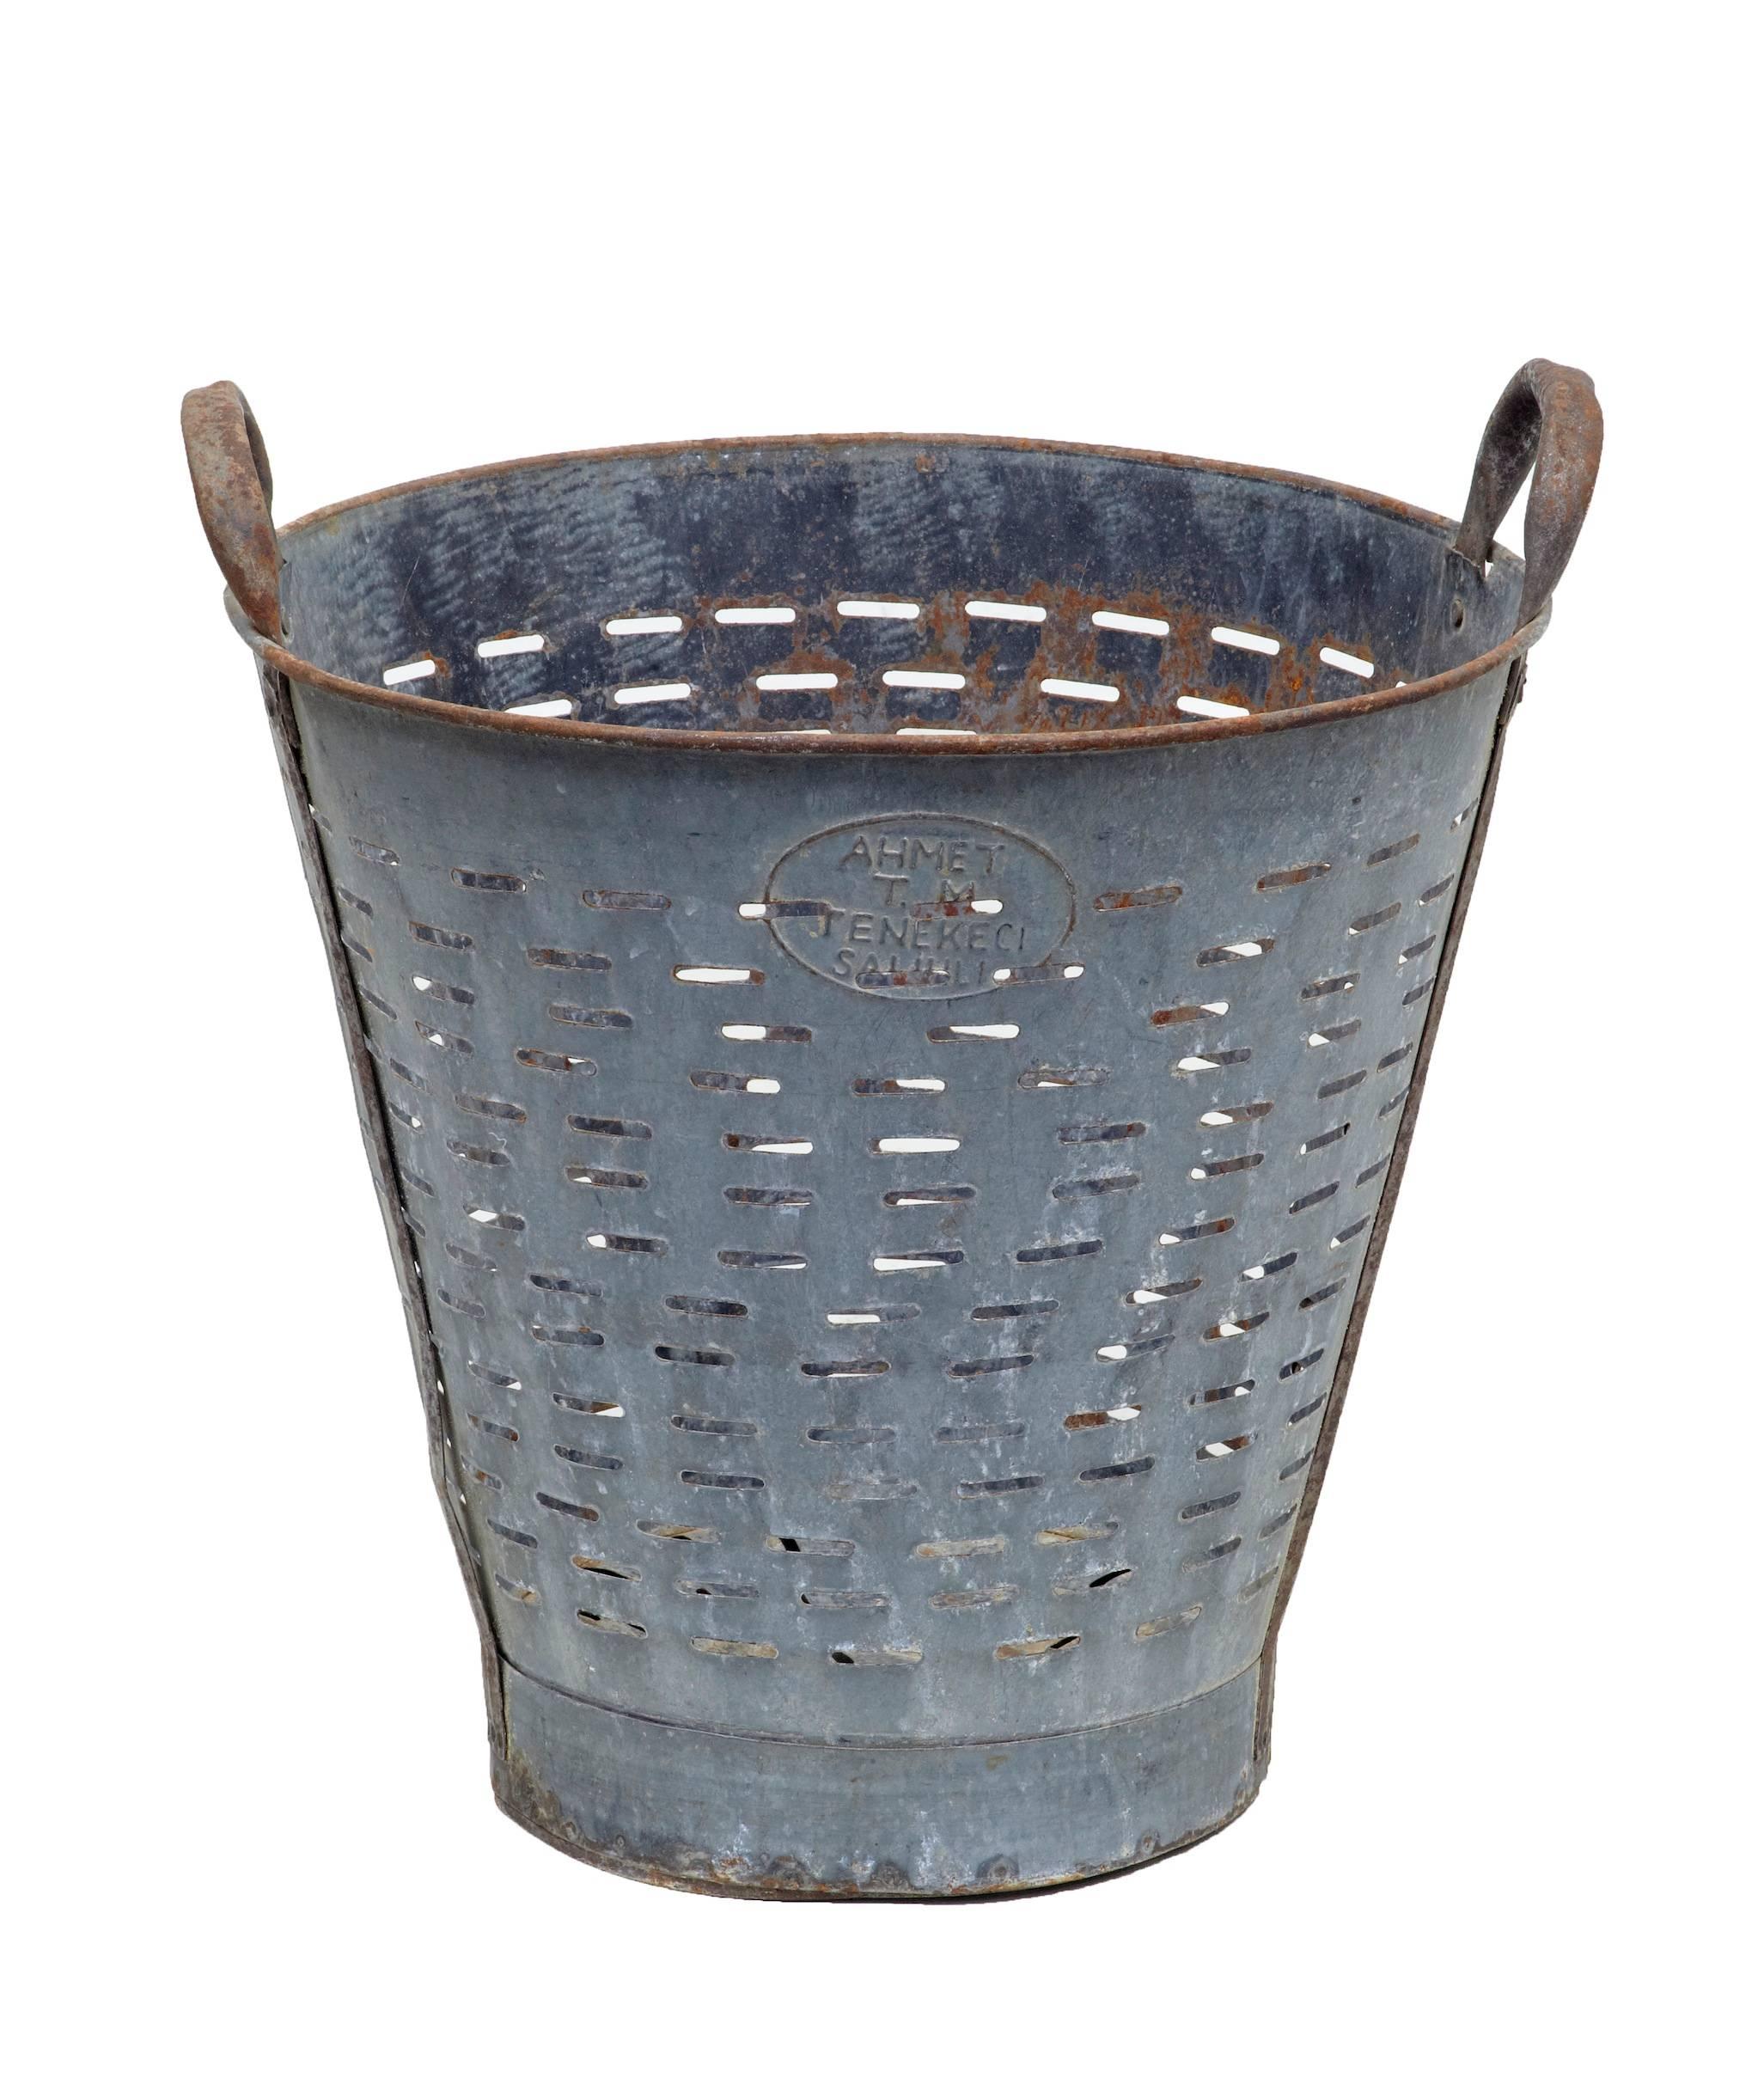 Metal slotted basket, used for fishing, circa 1900. Perfect for use now as a unique waste paper basket. Mild rusting.
Measures:
Height: 18 1/3